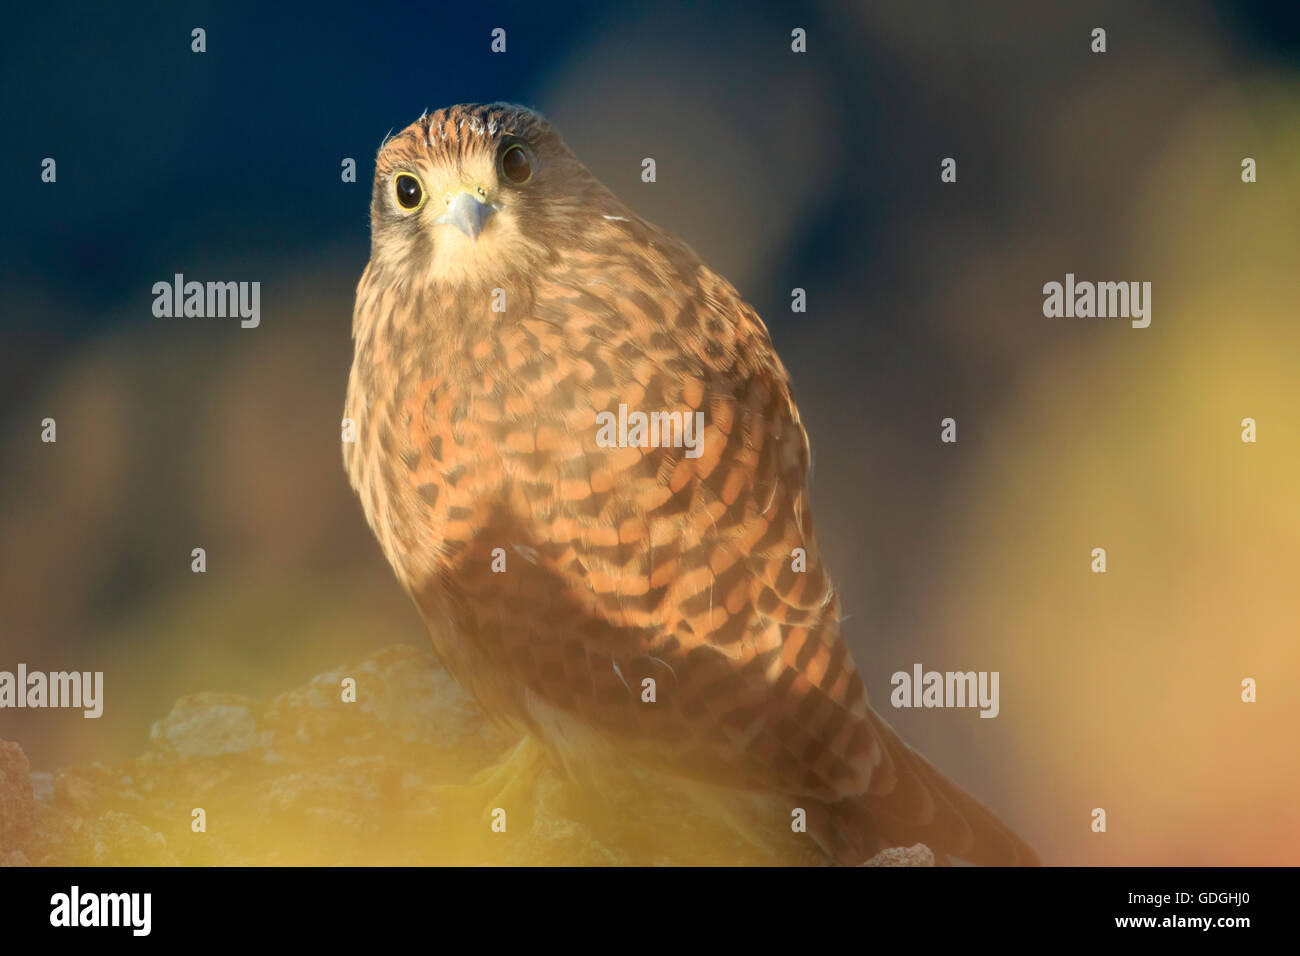 The common kestrel (Falco tinnunculus). Juvenile on the rocks of the escarpment, with plants on the foreground seen at eye level Stock Photo